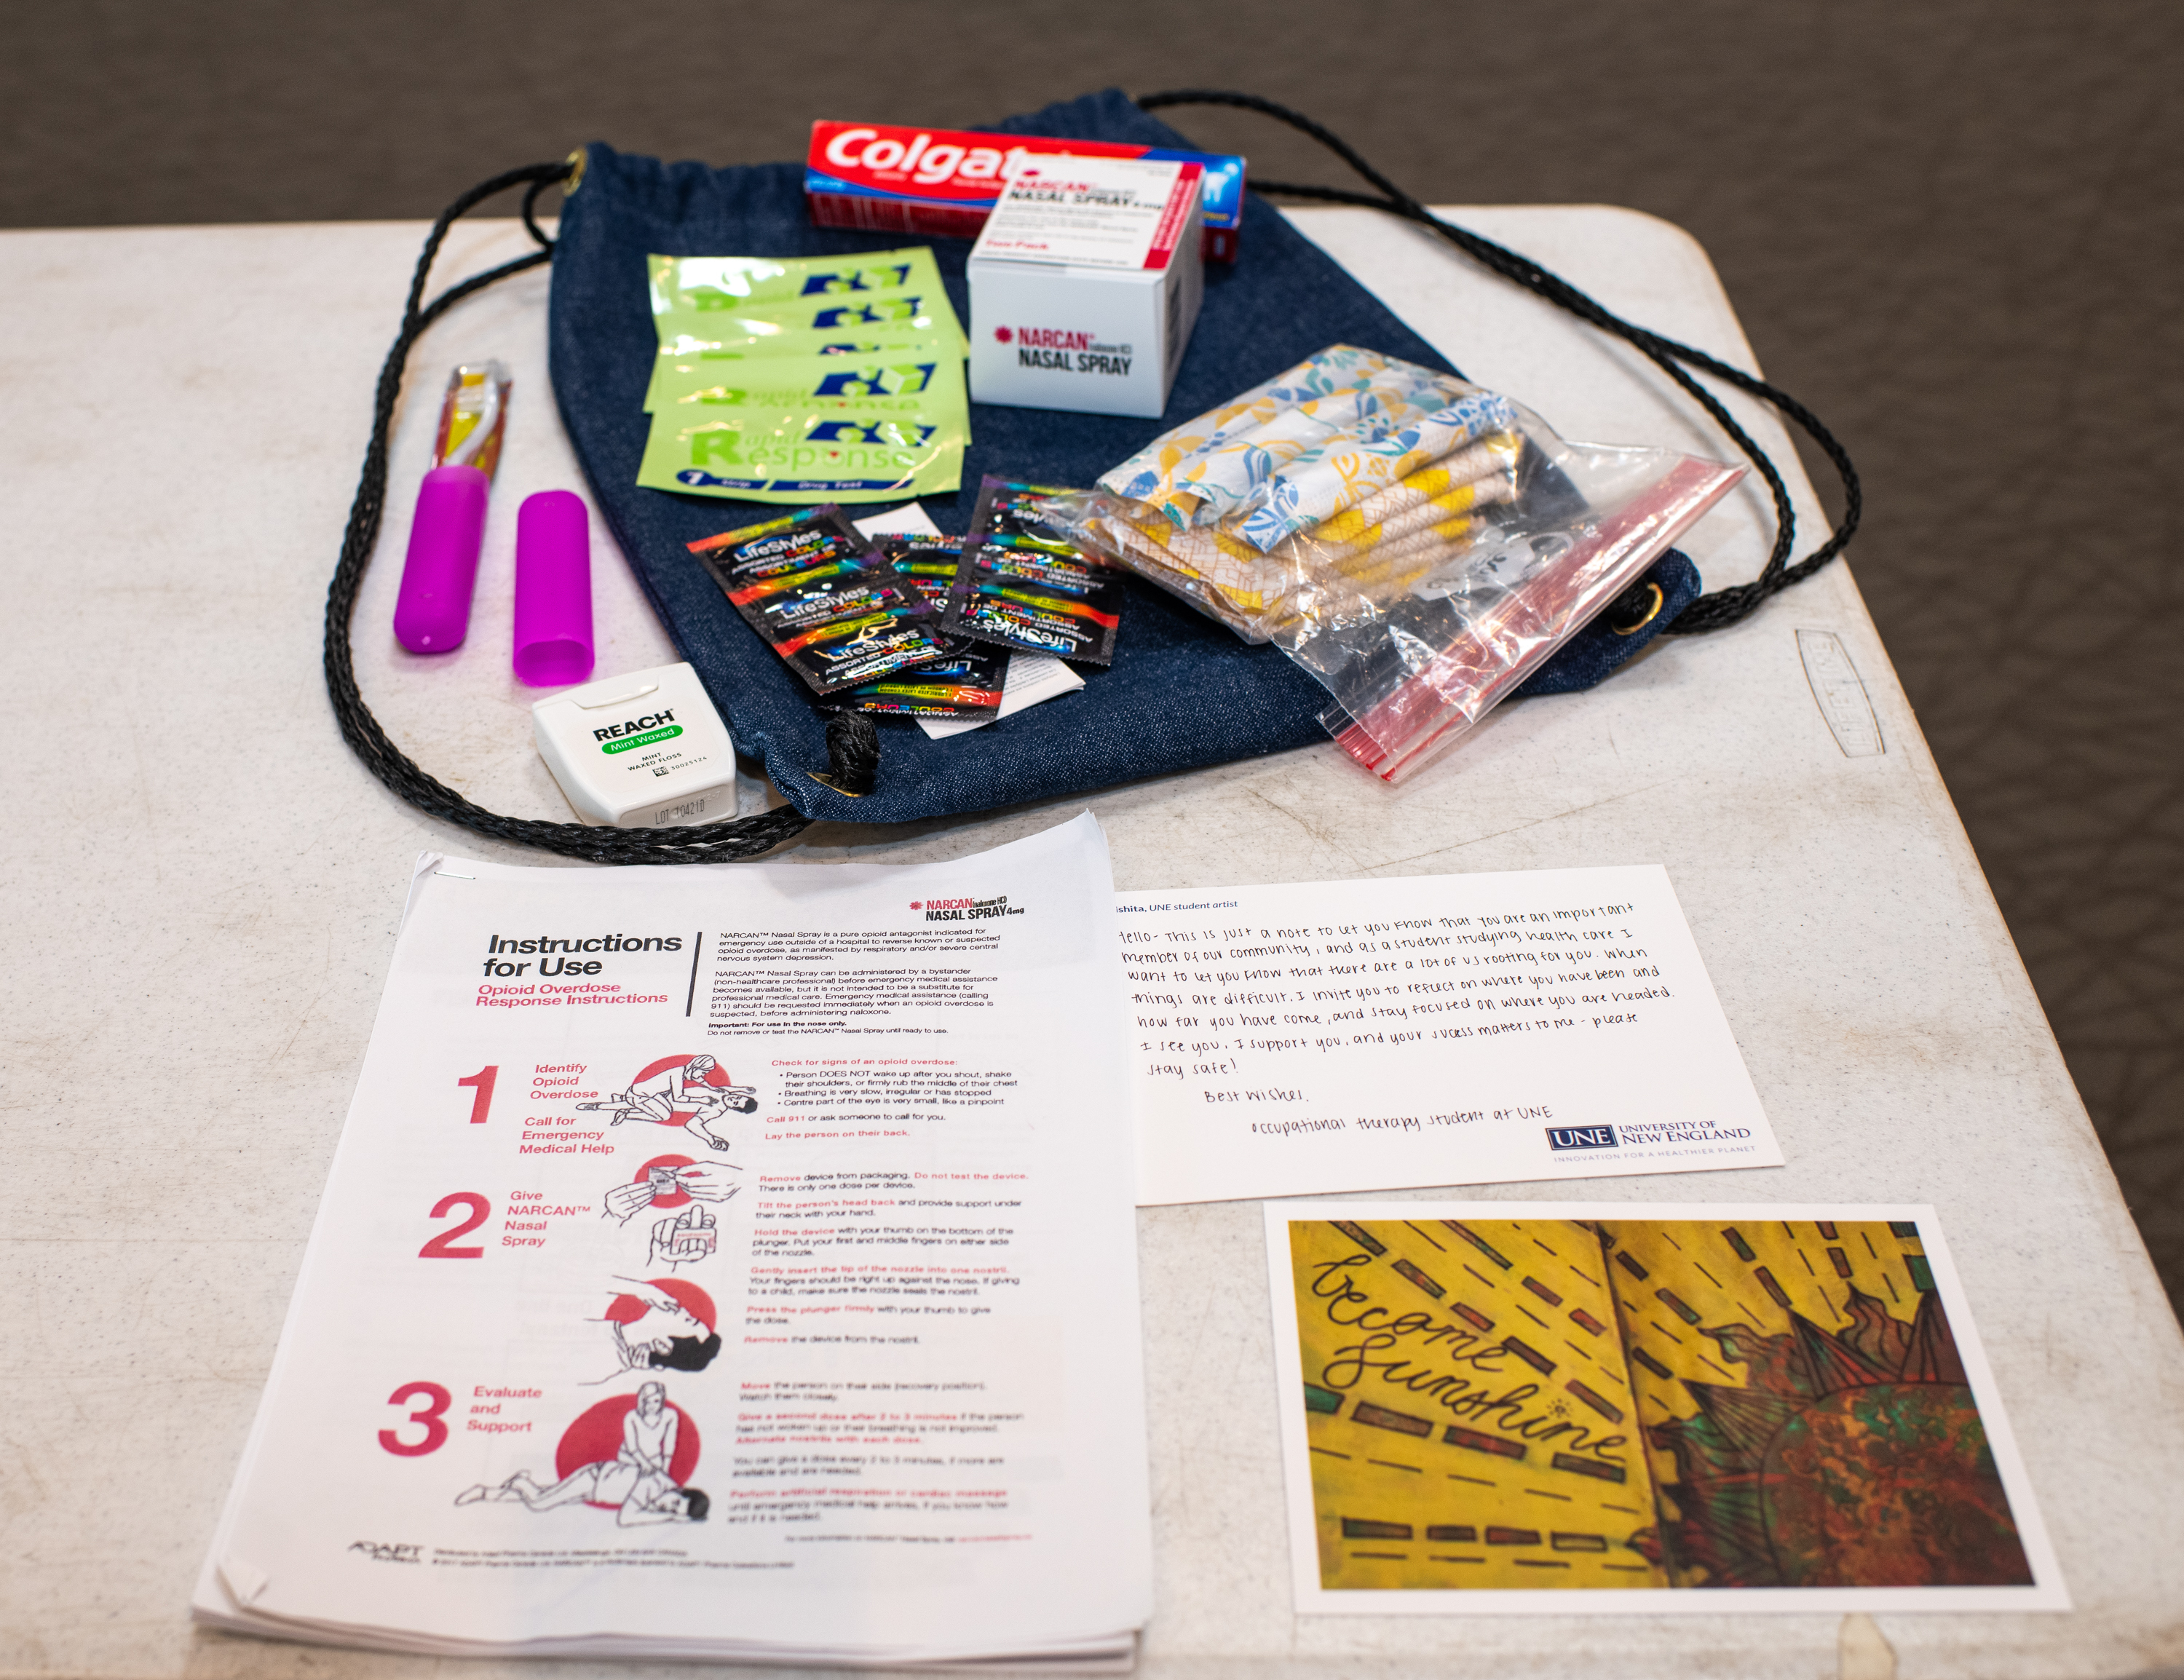 UNE students, MDOC partner to assemble 1,000 harm reduction kits